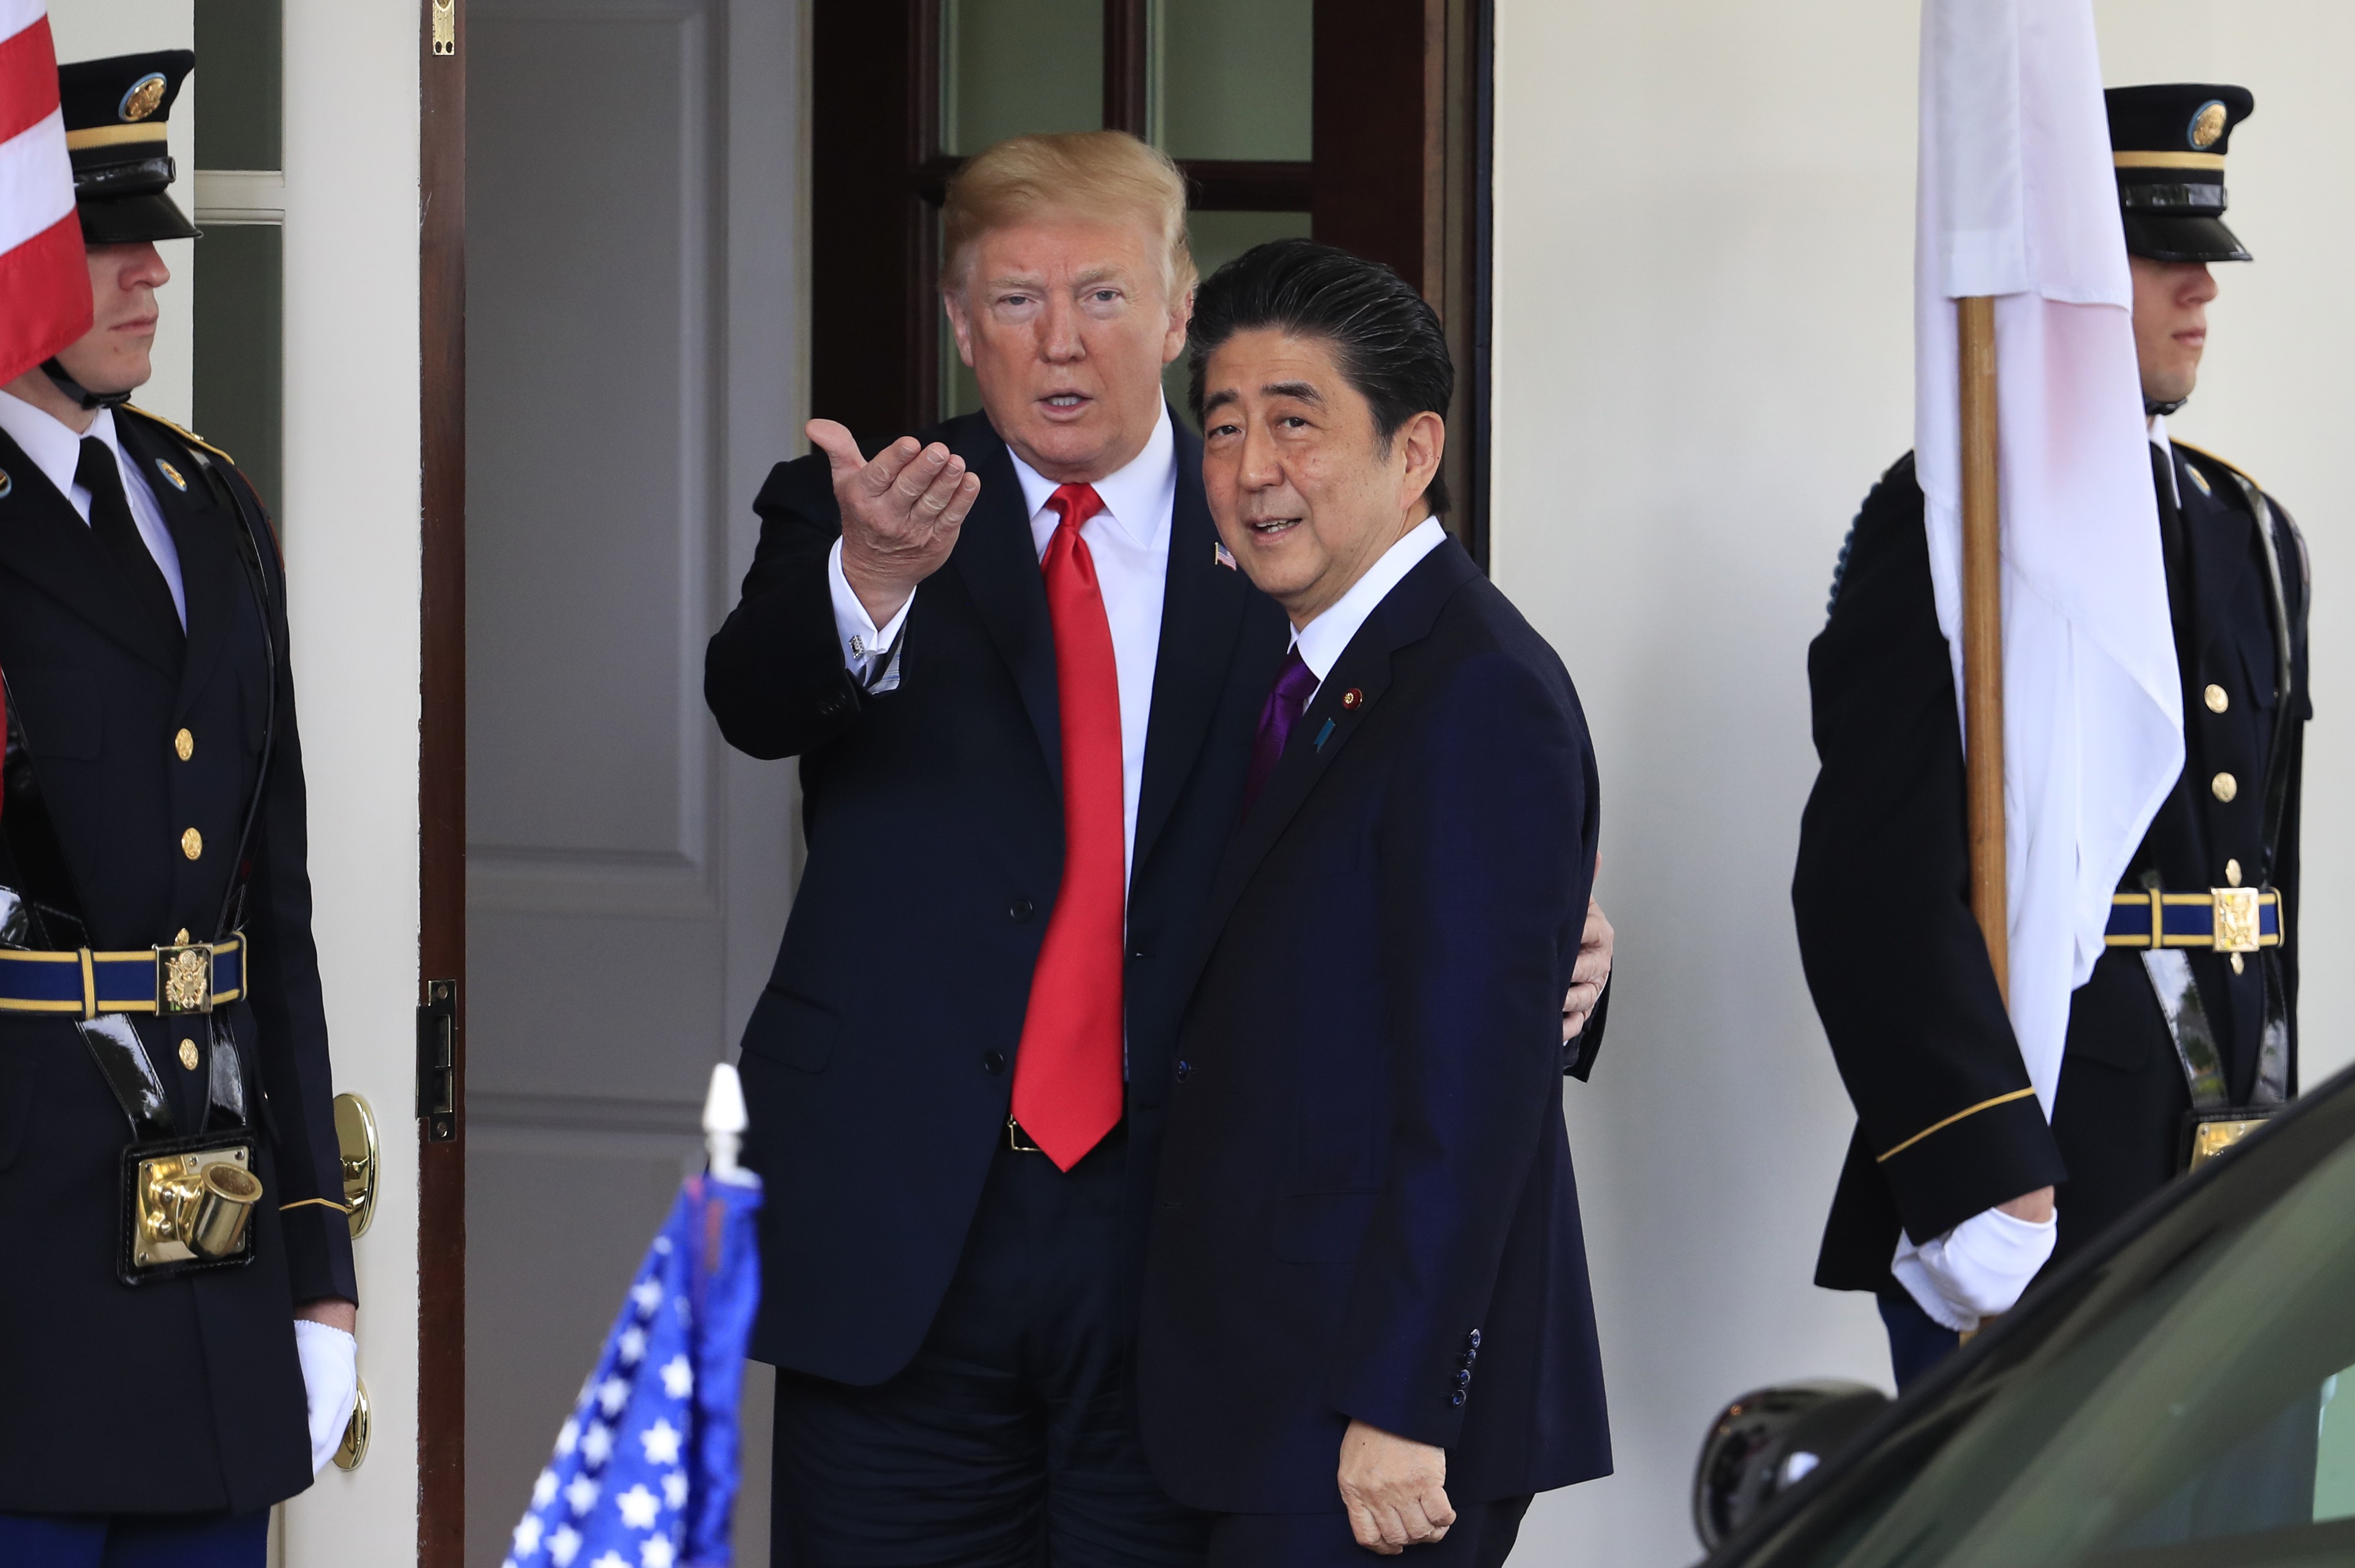 In this file photo from June 7, 2018, US President Donald Trump welcomes Japanese Prime Minister Shinzo Abe to the White House. China may have replaced Japan as the bogeyman, but Tokyo is still a villain in Trump’s mind, writes William Pesek. Photo: AP